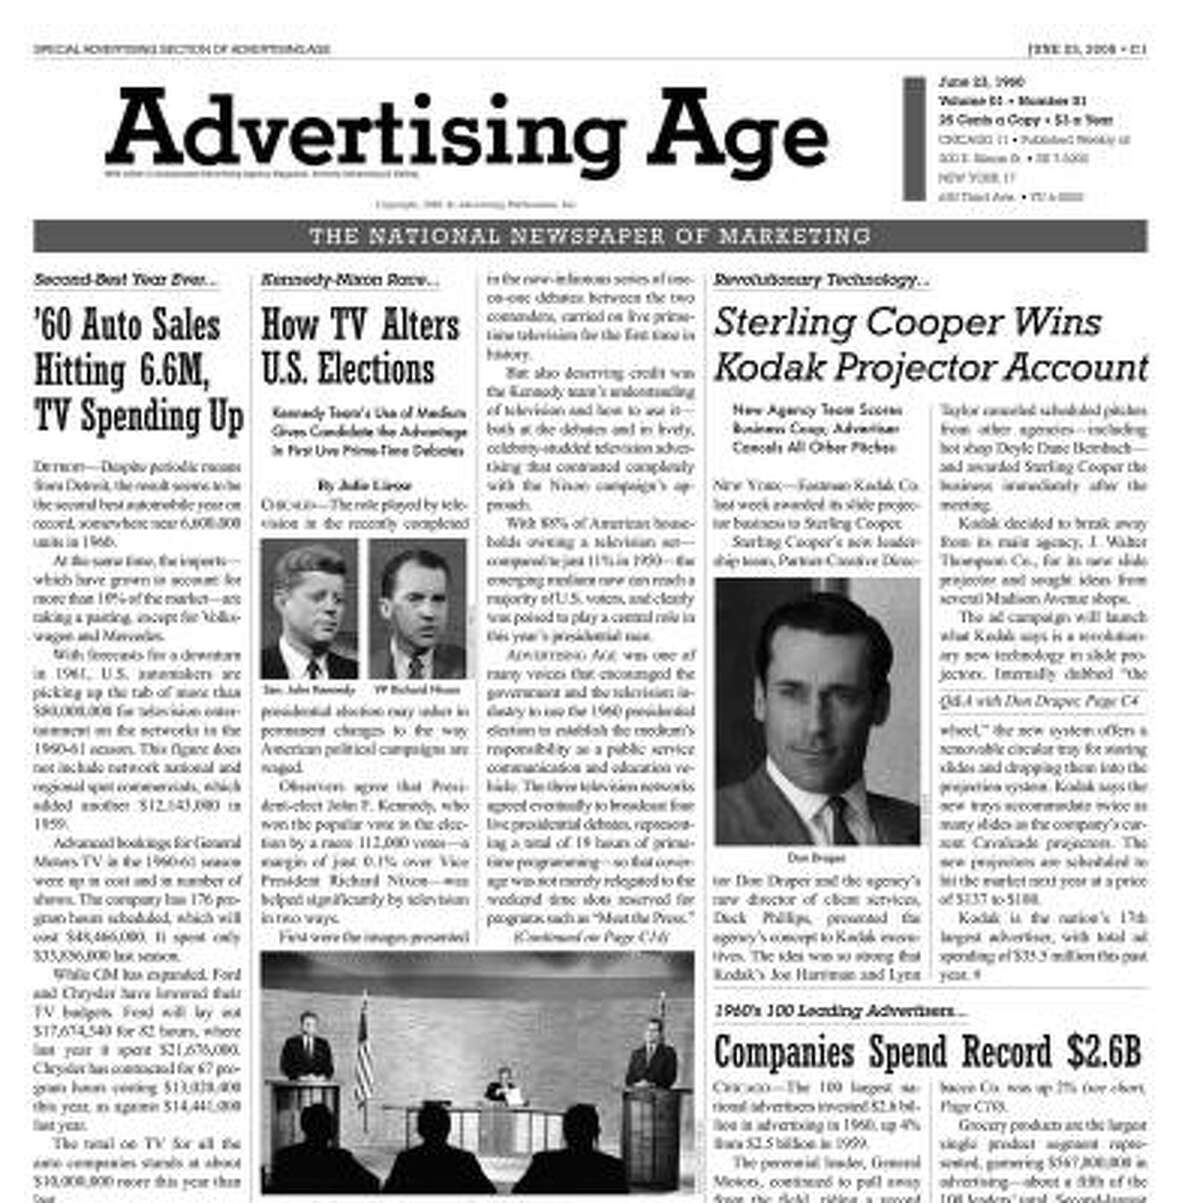 Mad Men, a television series about an advertising agency in the 1960s, is inspiring commercials, designer fashions, merchandise such as cigarette lighters and calendars, and a mock issue of the trade publication Advertising Age.